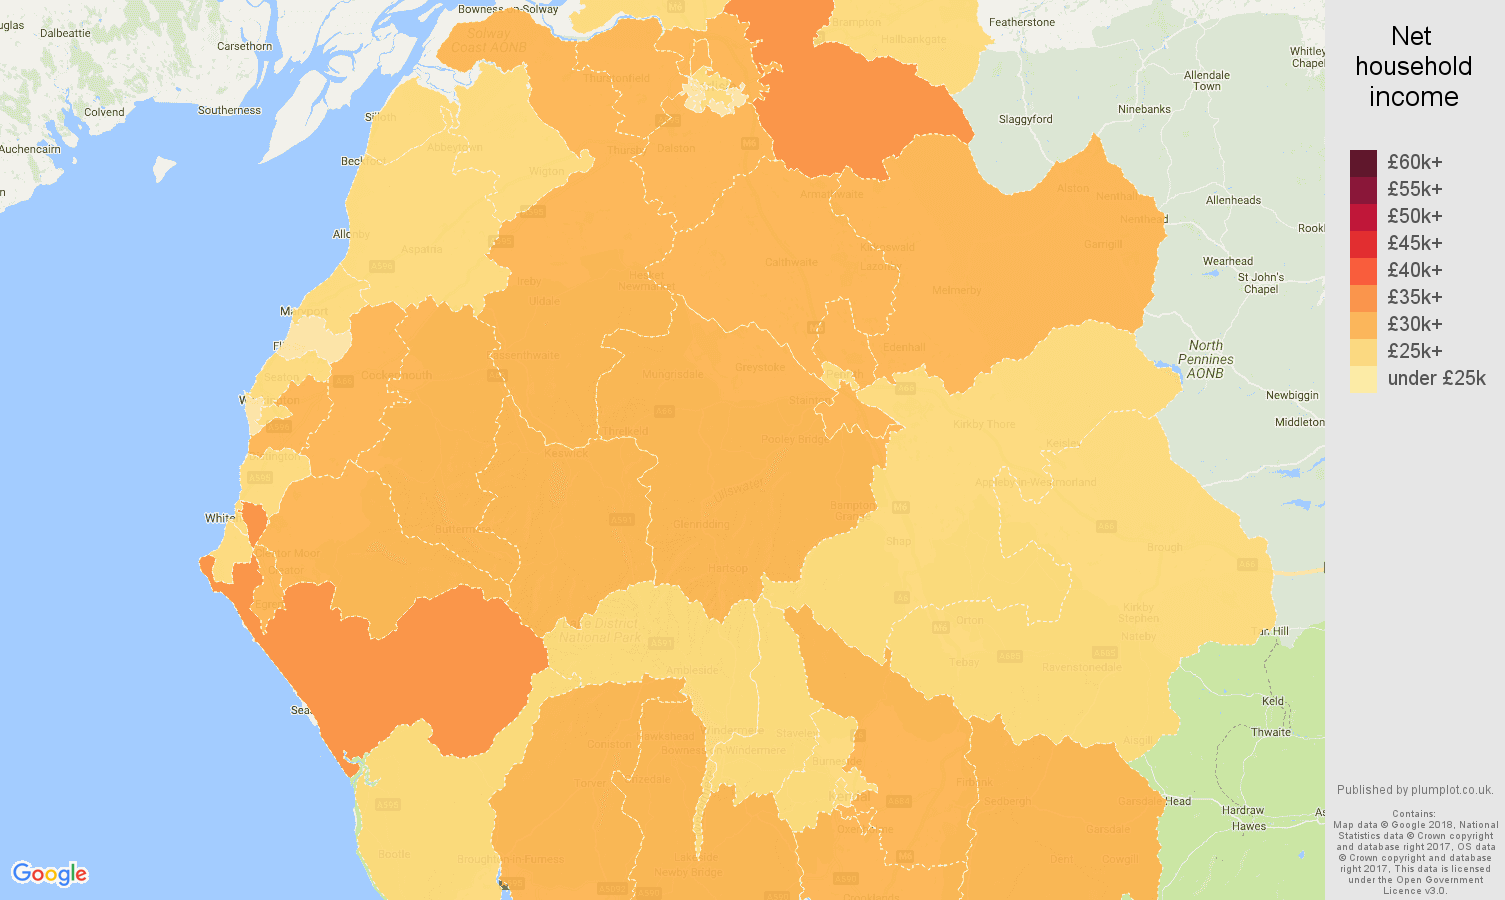 Cumbria net household income map